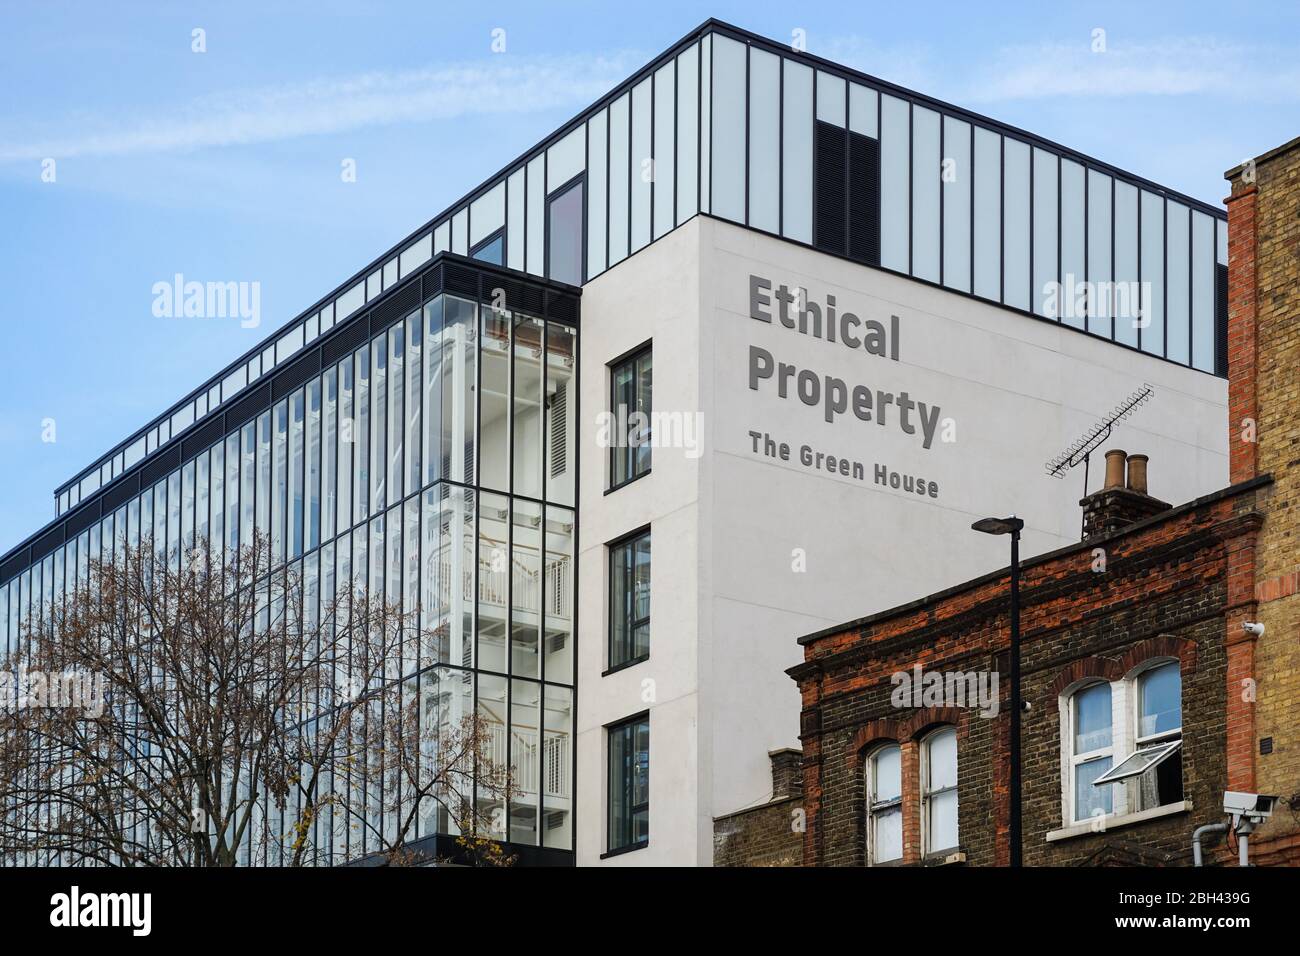 The Green House in Bethnal Green, Ethical Property Company building, London, England United Kingdom UK Stock Photo